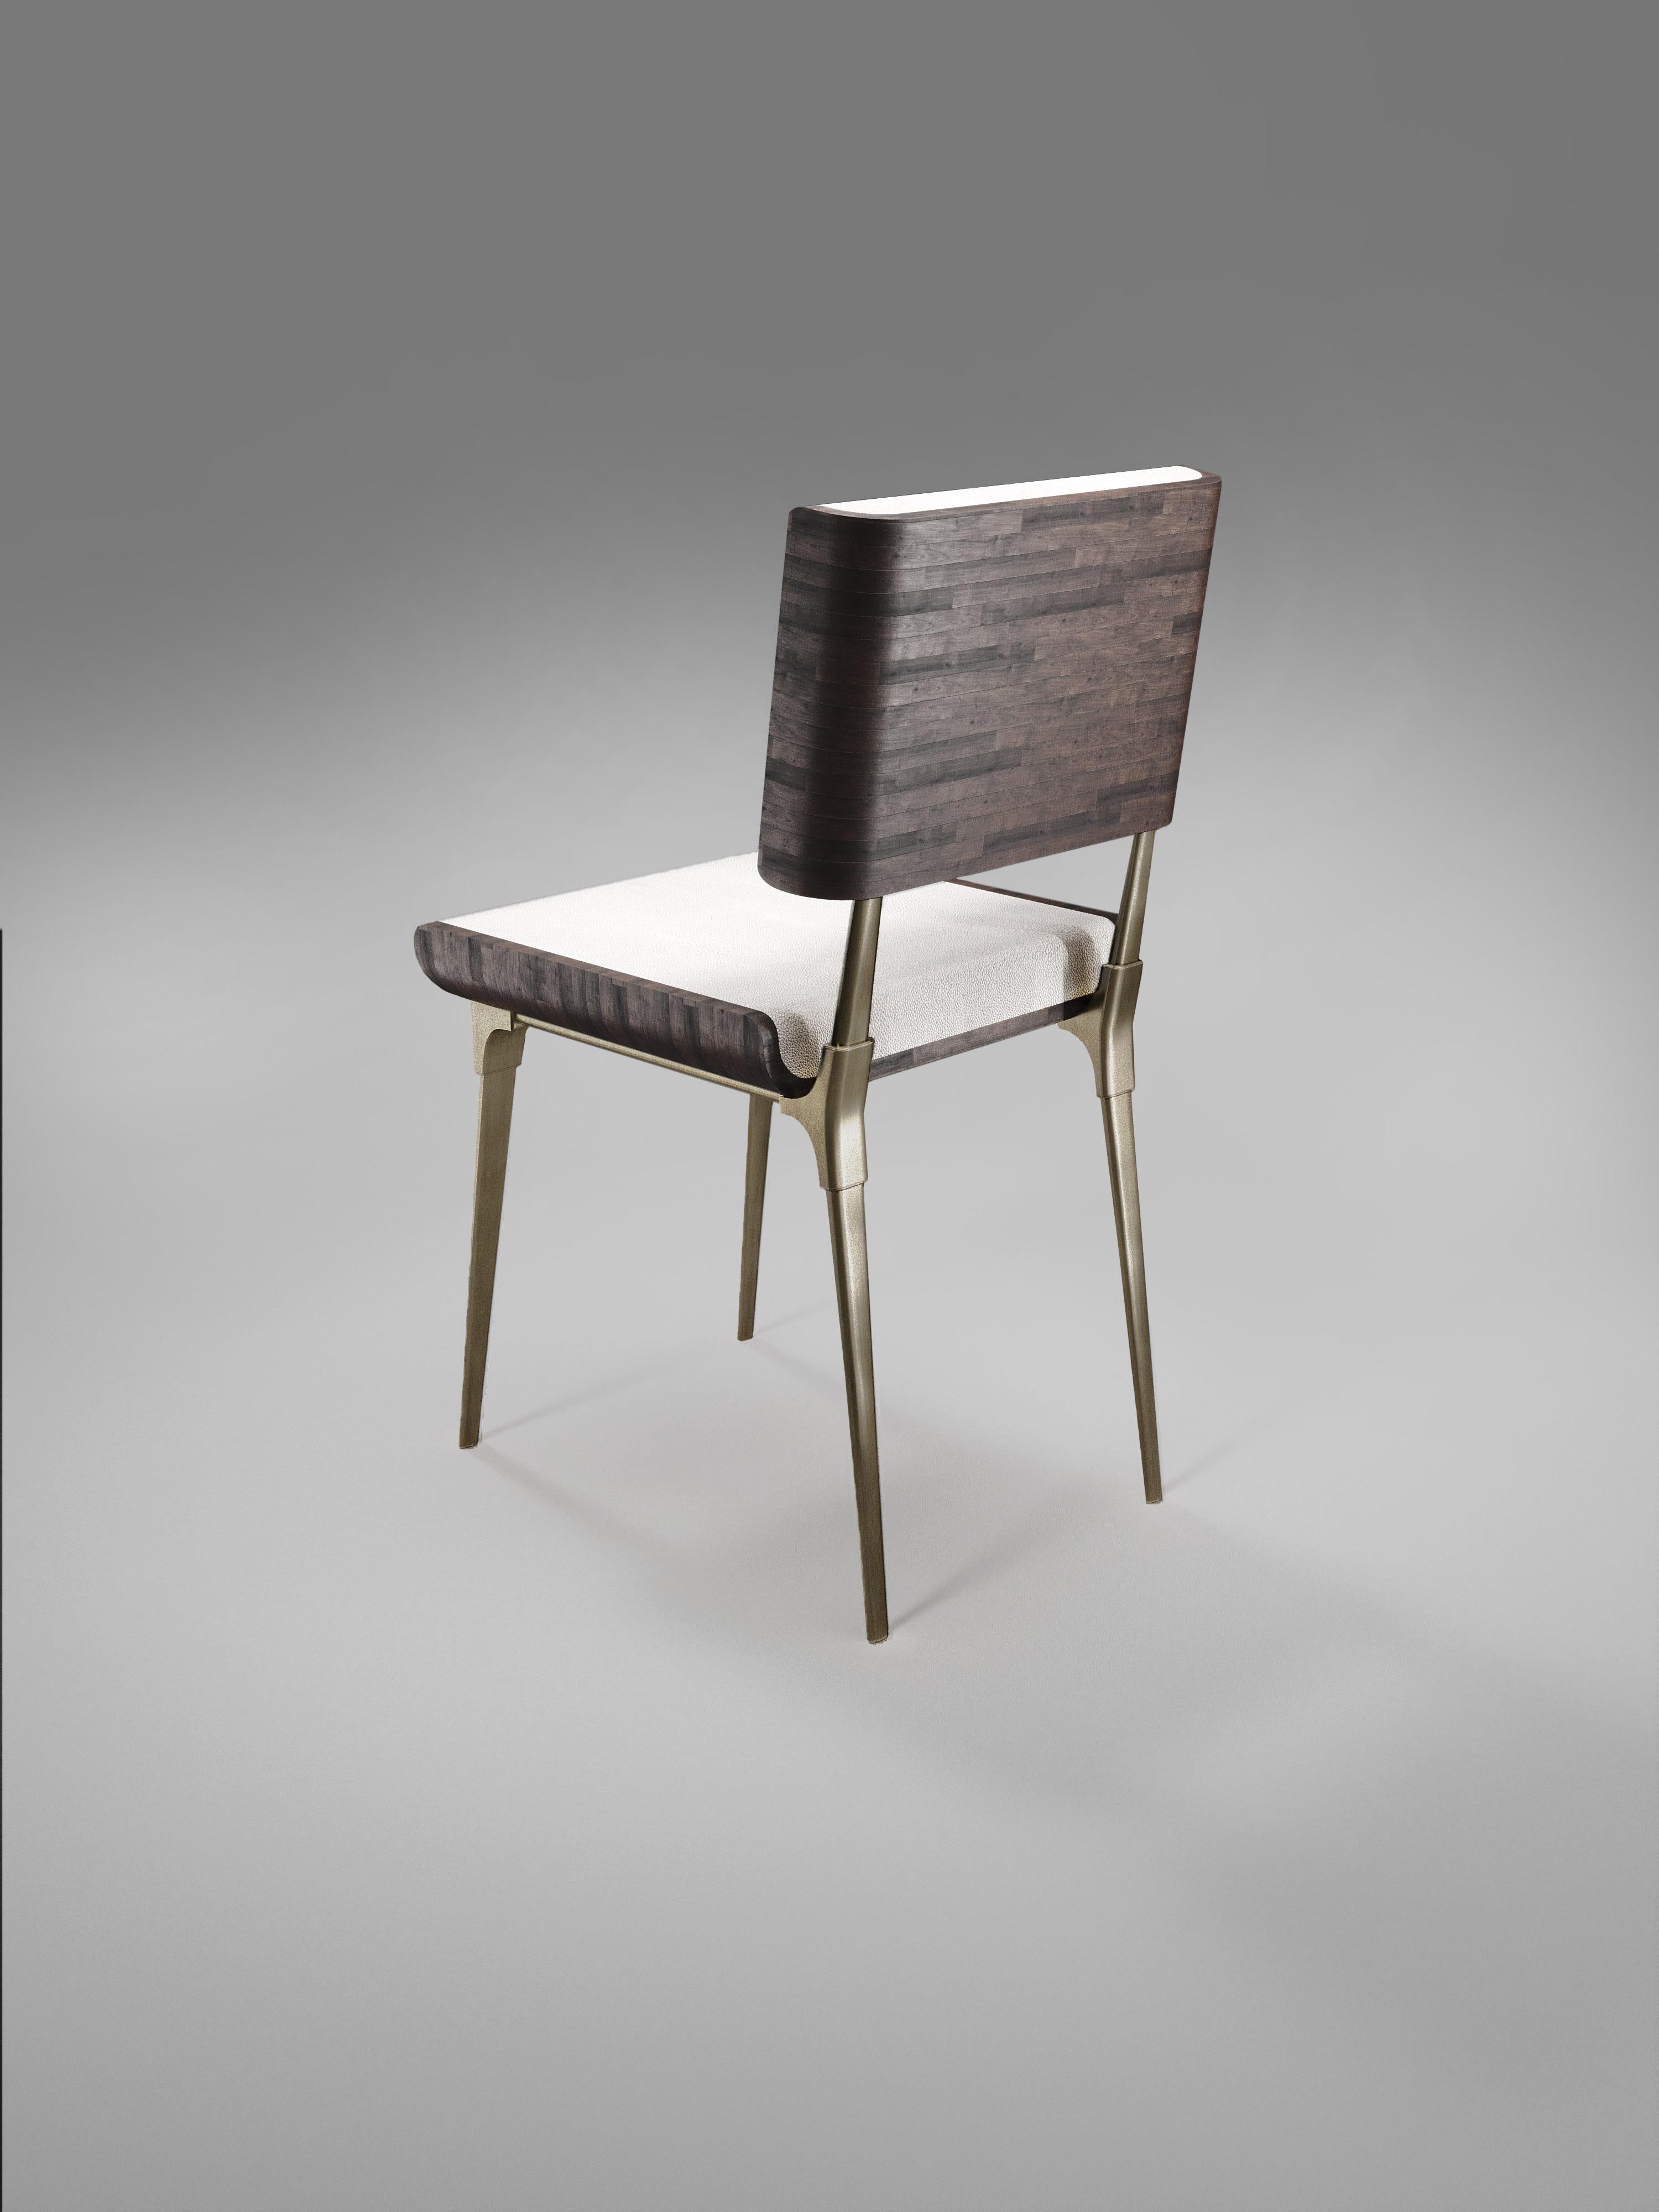 Inspired by the original Dandy Bench by Kifu Paris (see images at end of slide), the Dandy II Chair is the ultimate luxury seating for a dining room or corner area. The seating area is inlaid in cream shagreen and the legs, frame and sides of the